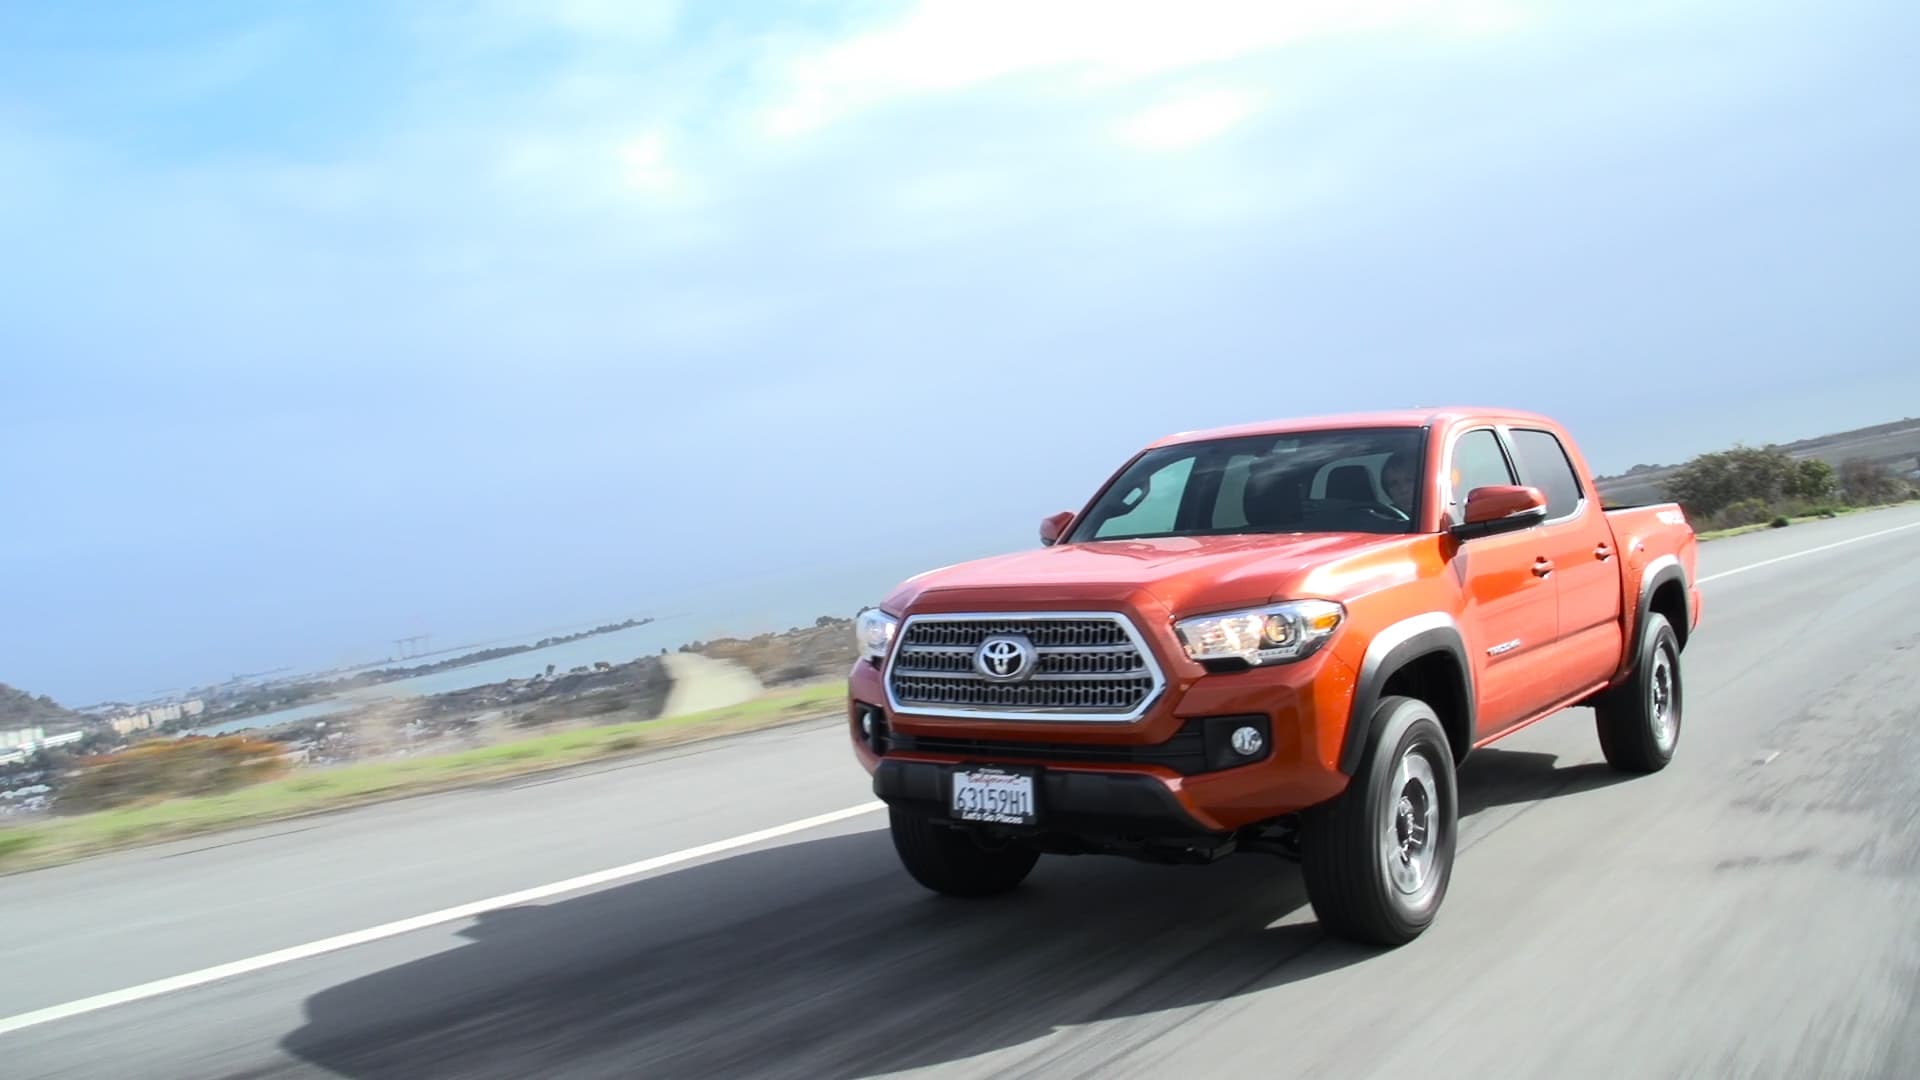 17 Toyota Tacoma 2016 wallpapers HD High Resolution Download